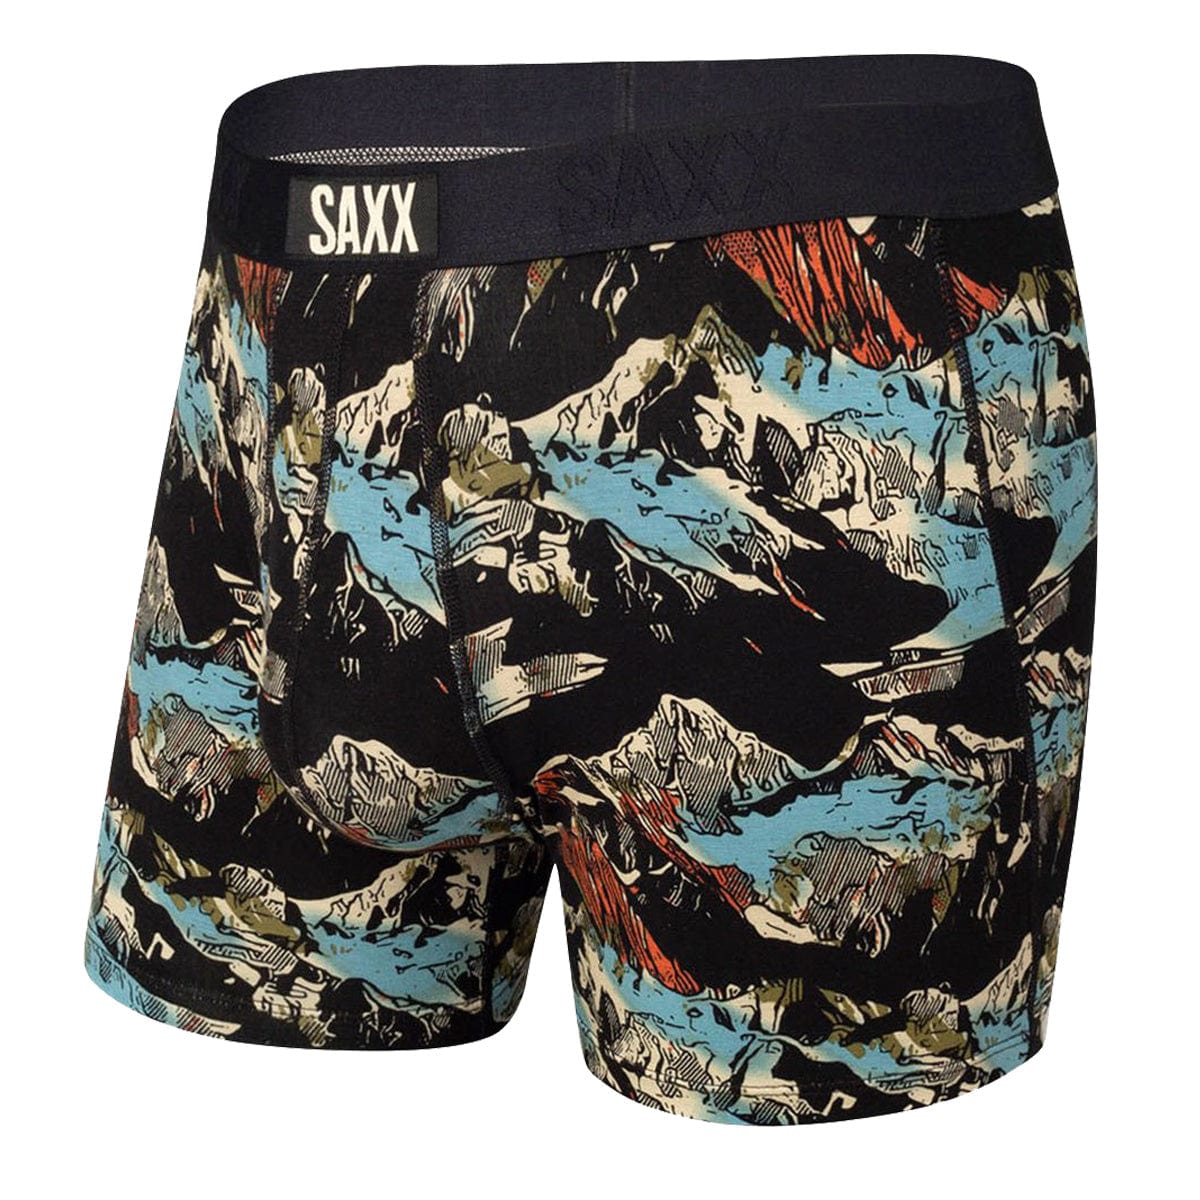 Saxx Ultra Boxers - Black Mountainscape - The Hockey Shop Source For Sports